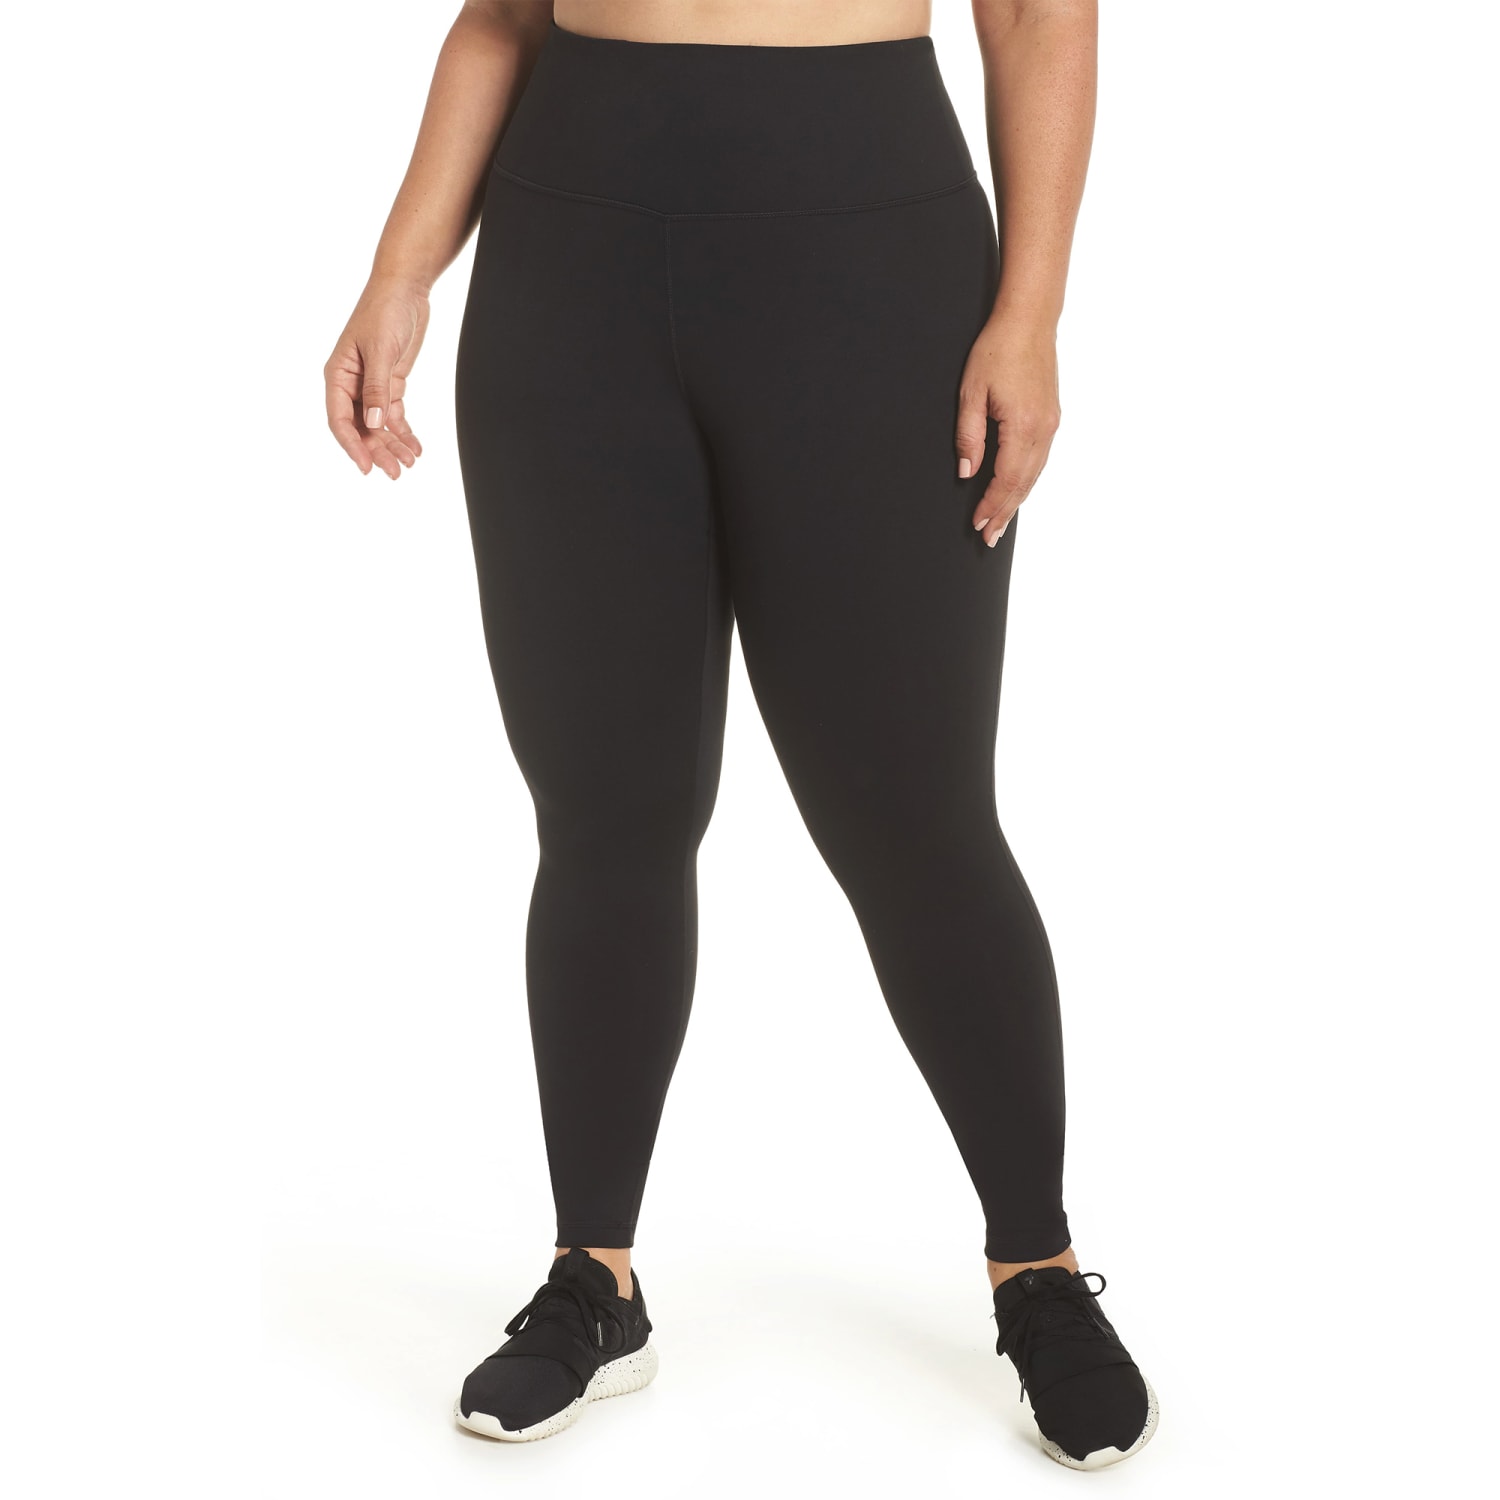 Nordstrom Zella leggings reviews: Why they're so popular